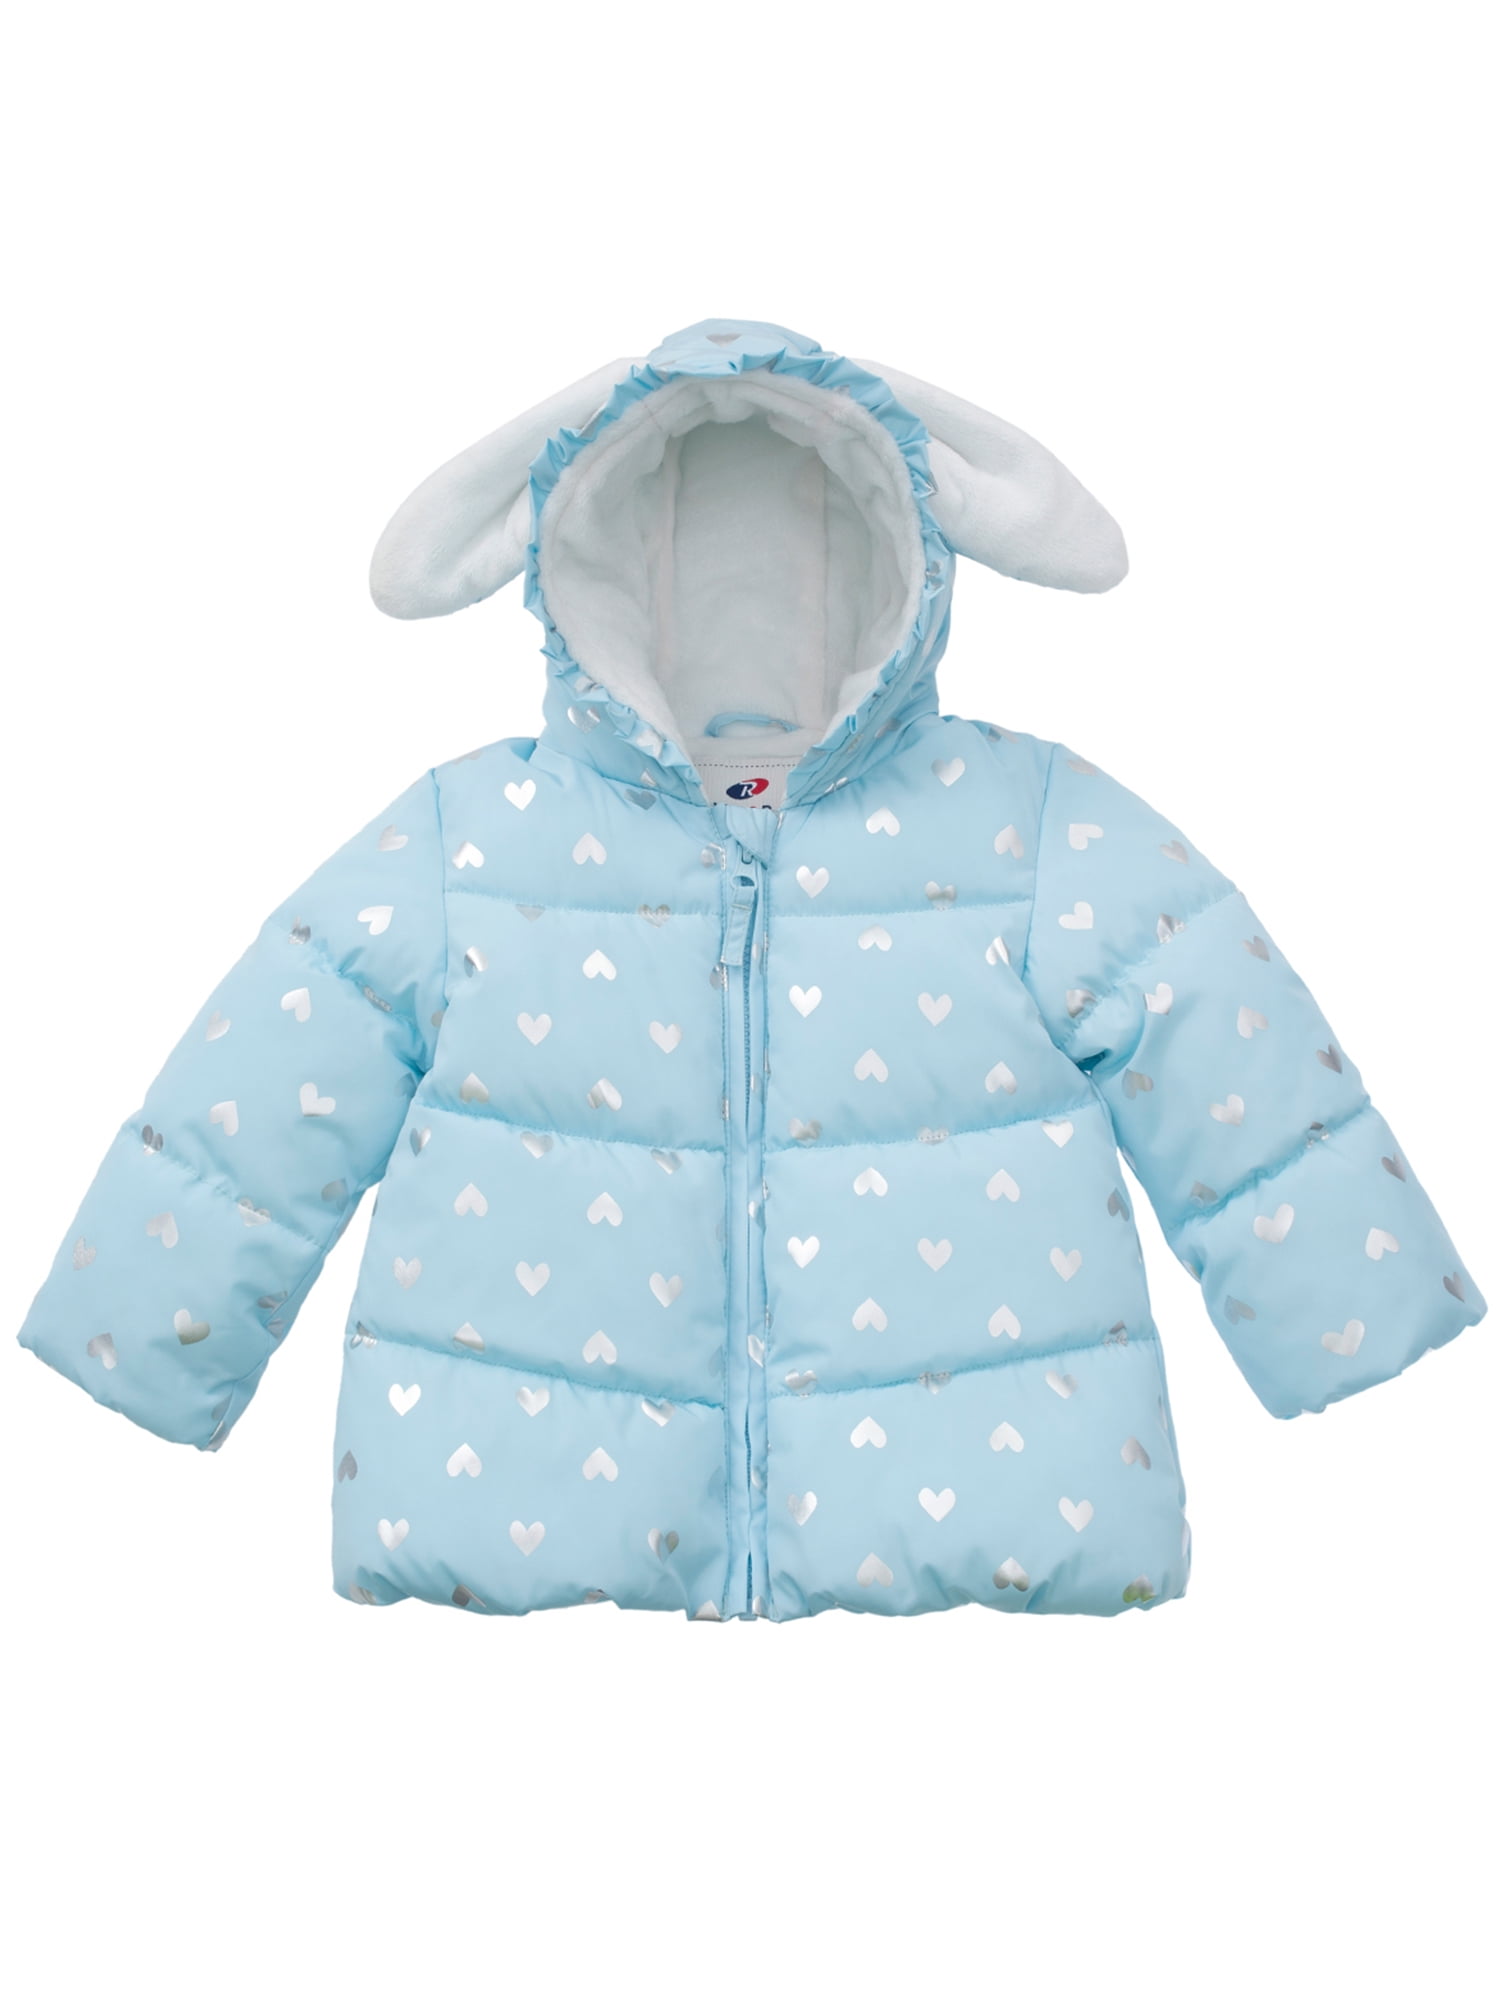 Rokka&Rolla Baby Girls' Water-Resistant Soft Mini Fur Lined Puffer Jacket Coat for Newborn Infant Toddler 